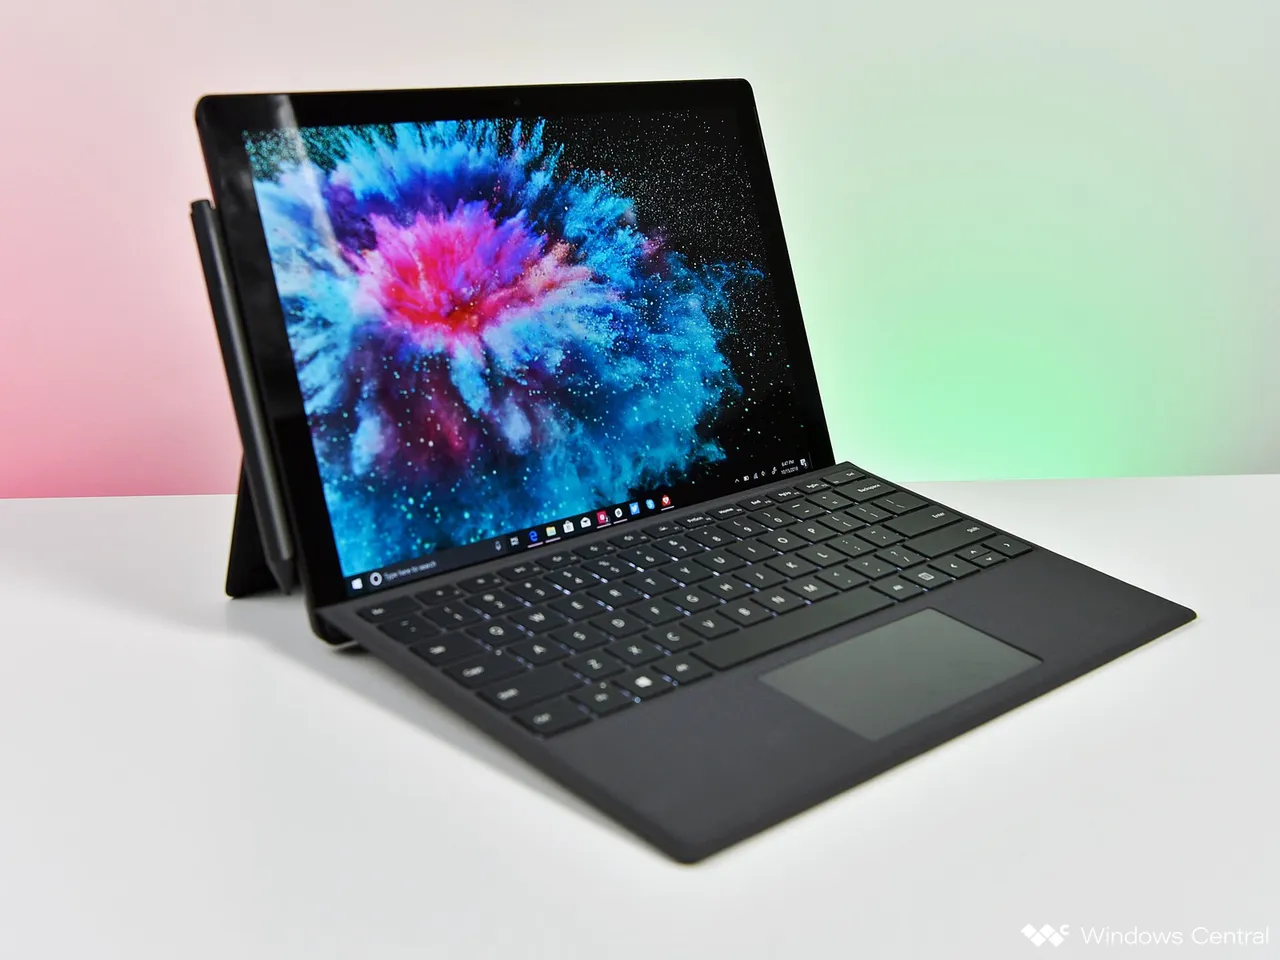 Microsoft Introduced Surface Pro 6 and Surface Laptop 2 in India